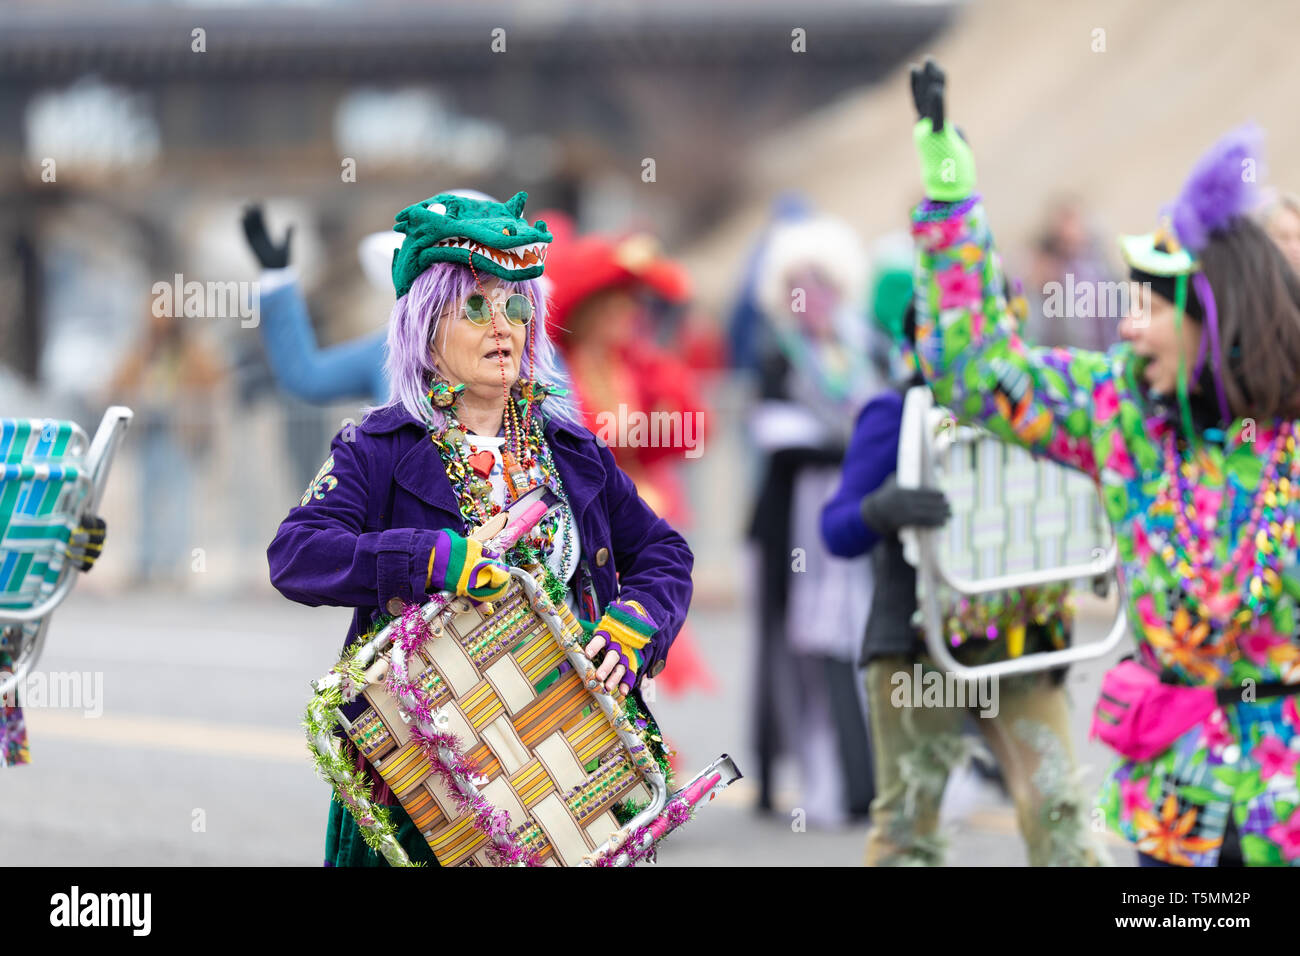 St. Louis, Missouri, USA - March 2, 2019: Bud Light Grand Parade, Women wearing colorful outfits and hats  perform a chair dance at the parade Stock Photo